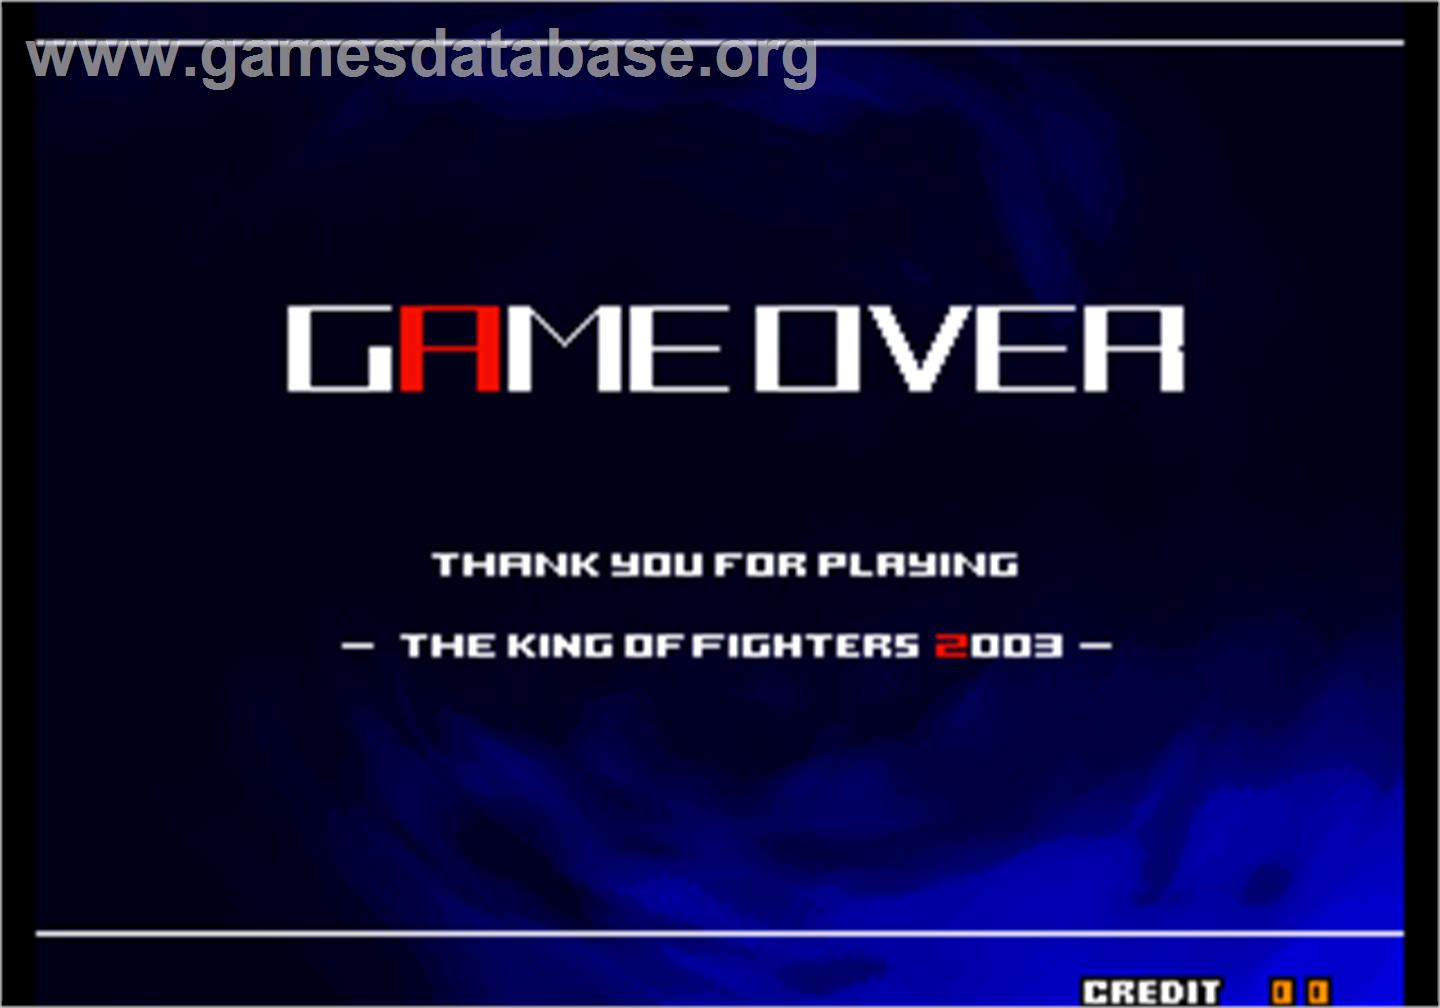 The King of Fighters 2004 Ultra Plus - Arcade - Artwork - Game Over Screen